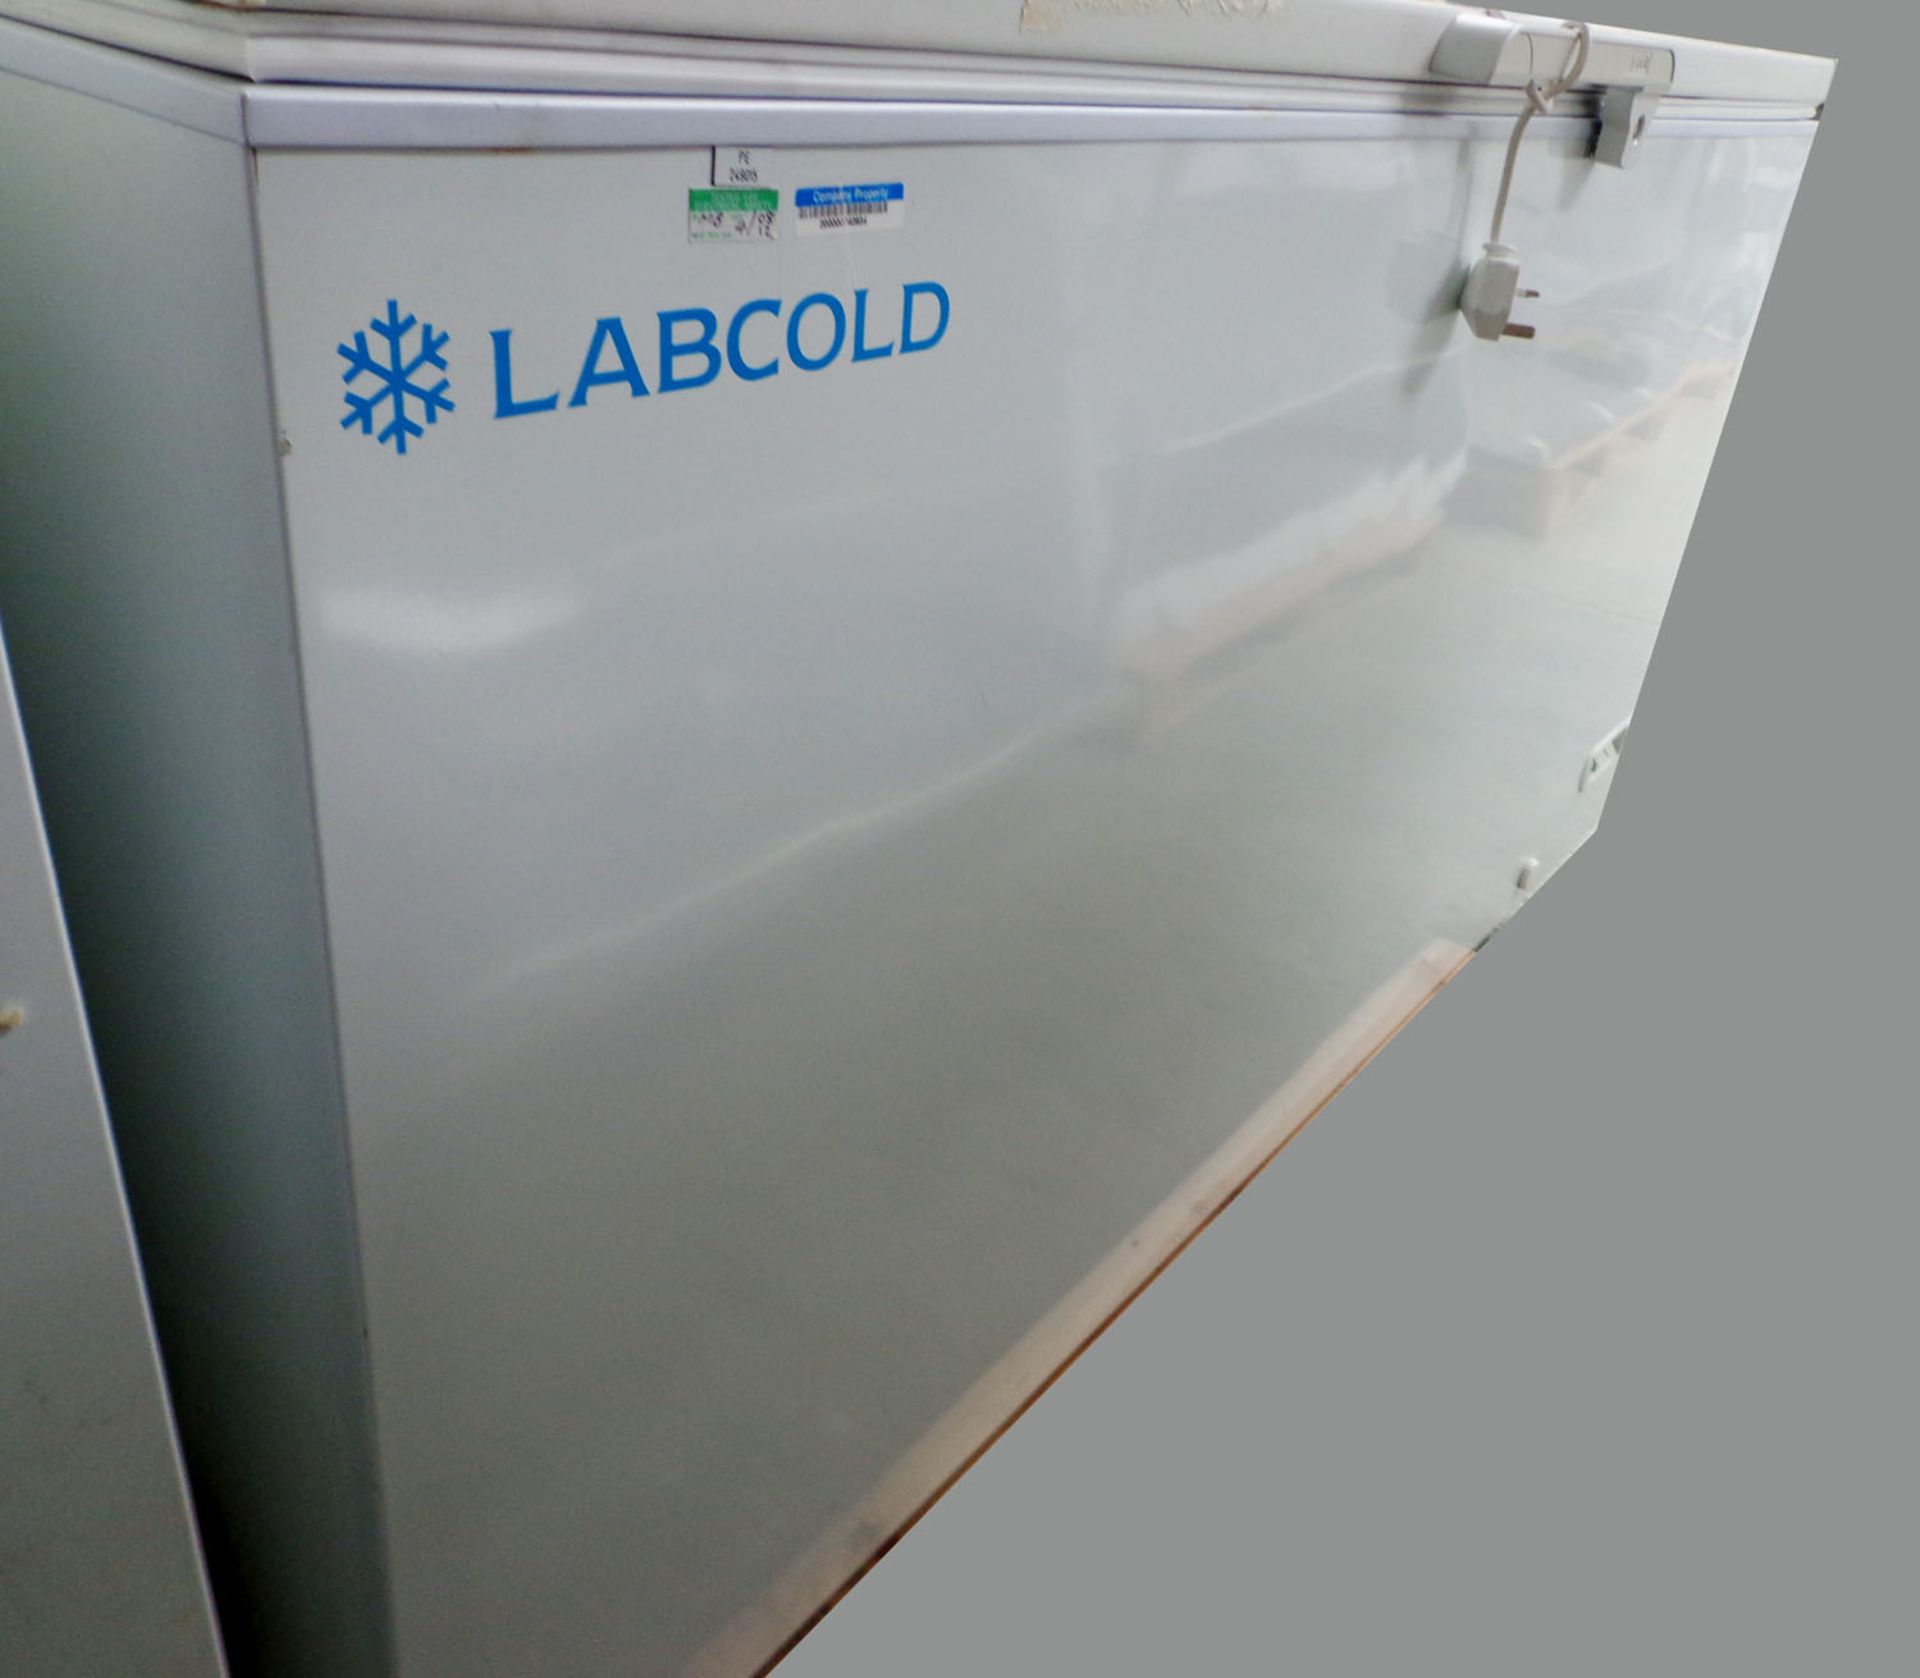 Labcold Chest freezer, serial number 4C4407 (Ref: WA11127)